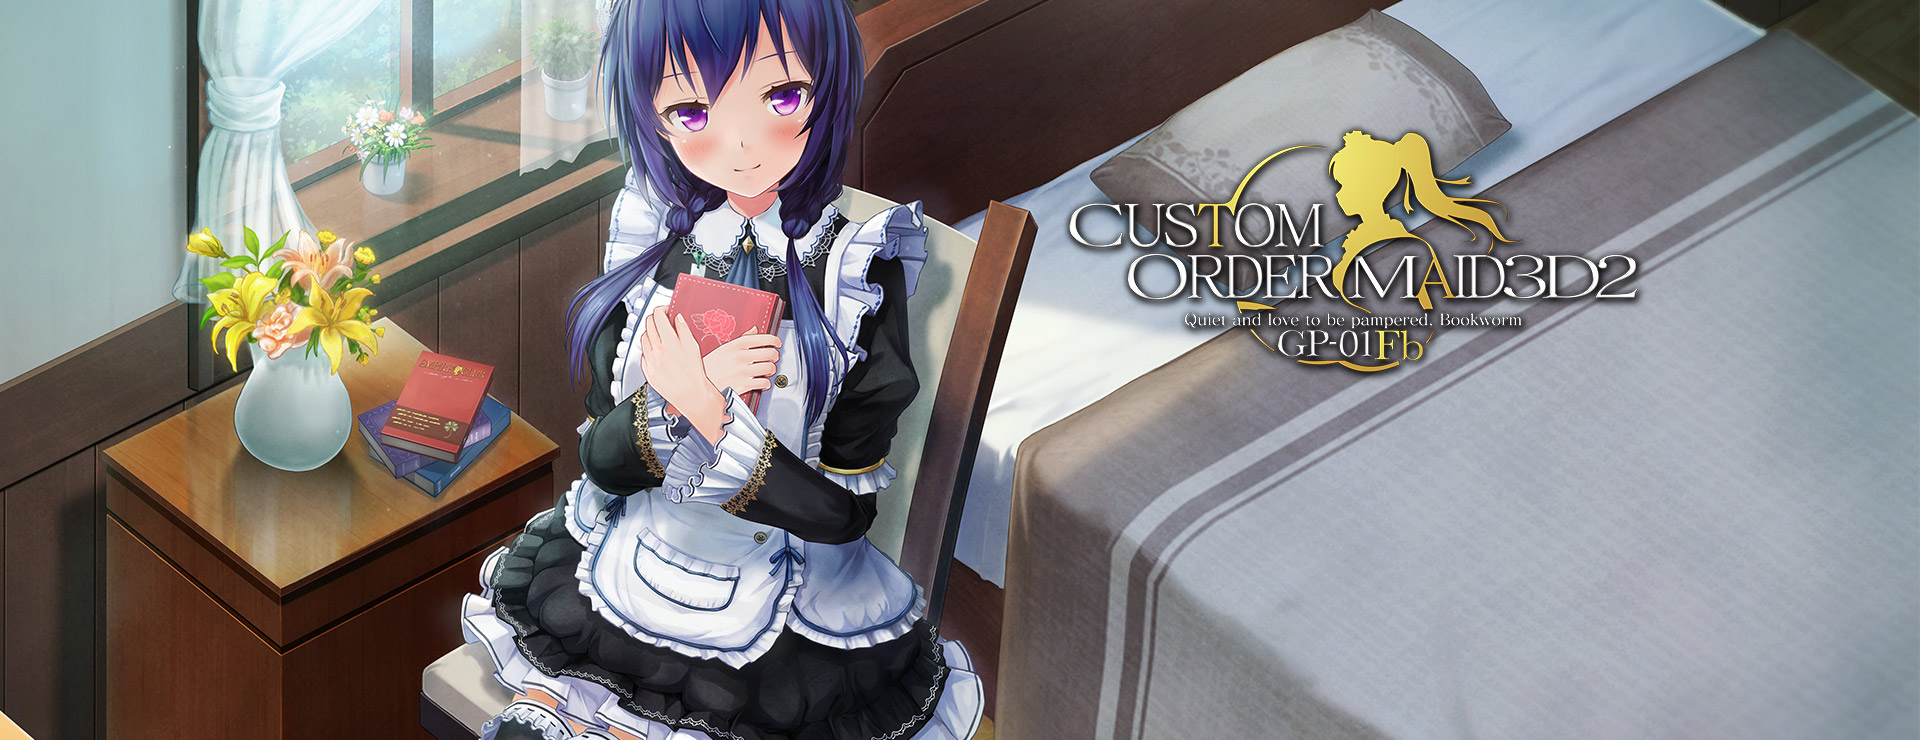 Custom Order Maid 3D2 - Quiet and love to be pampered Bookworm GP-01Fb DLC - Simulación Juego